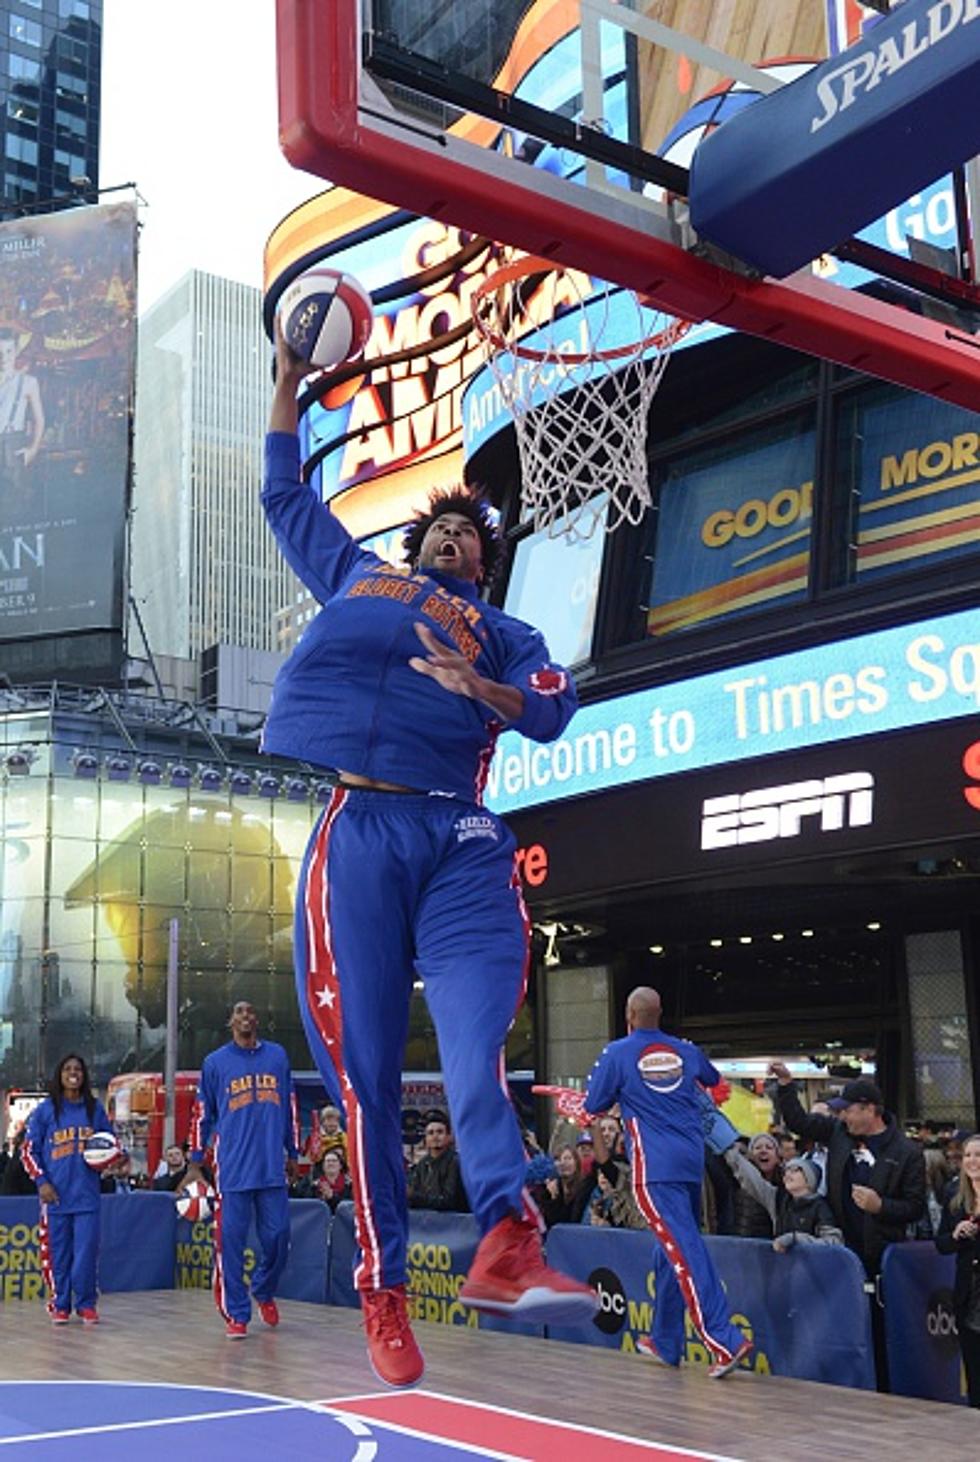 Globetrotters Set 7 World Records in 1 Day 